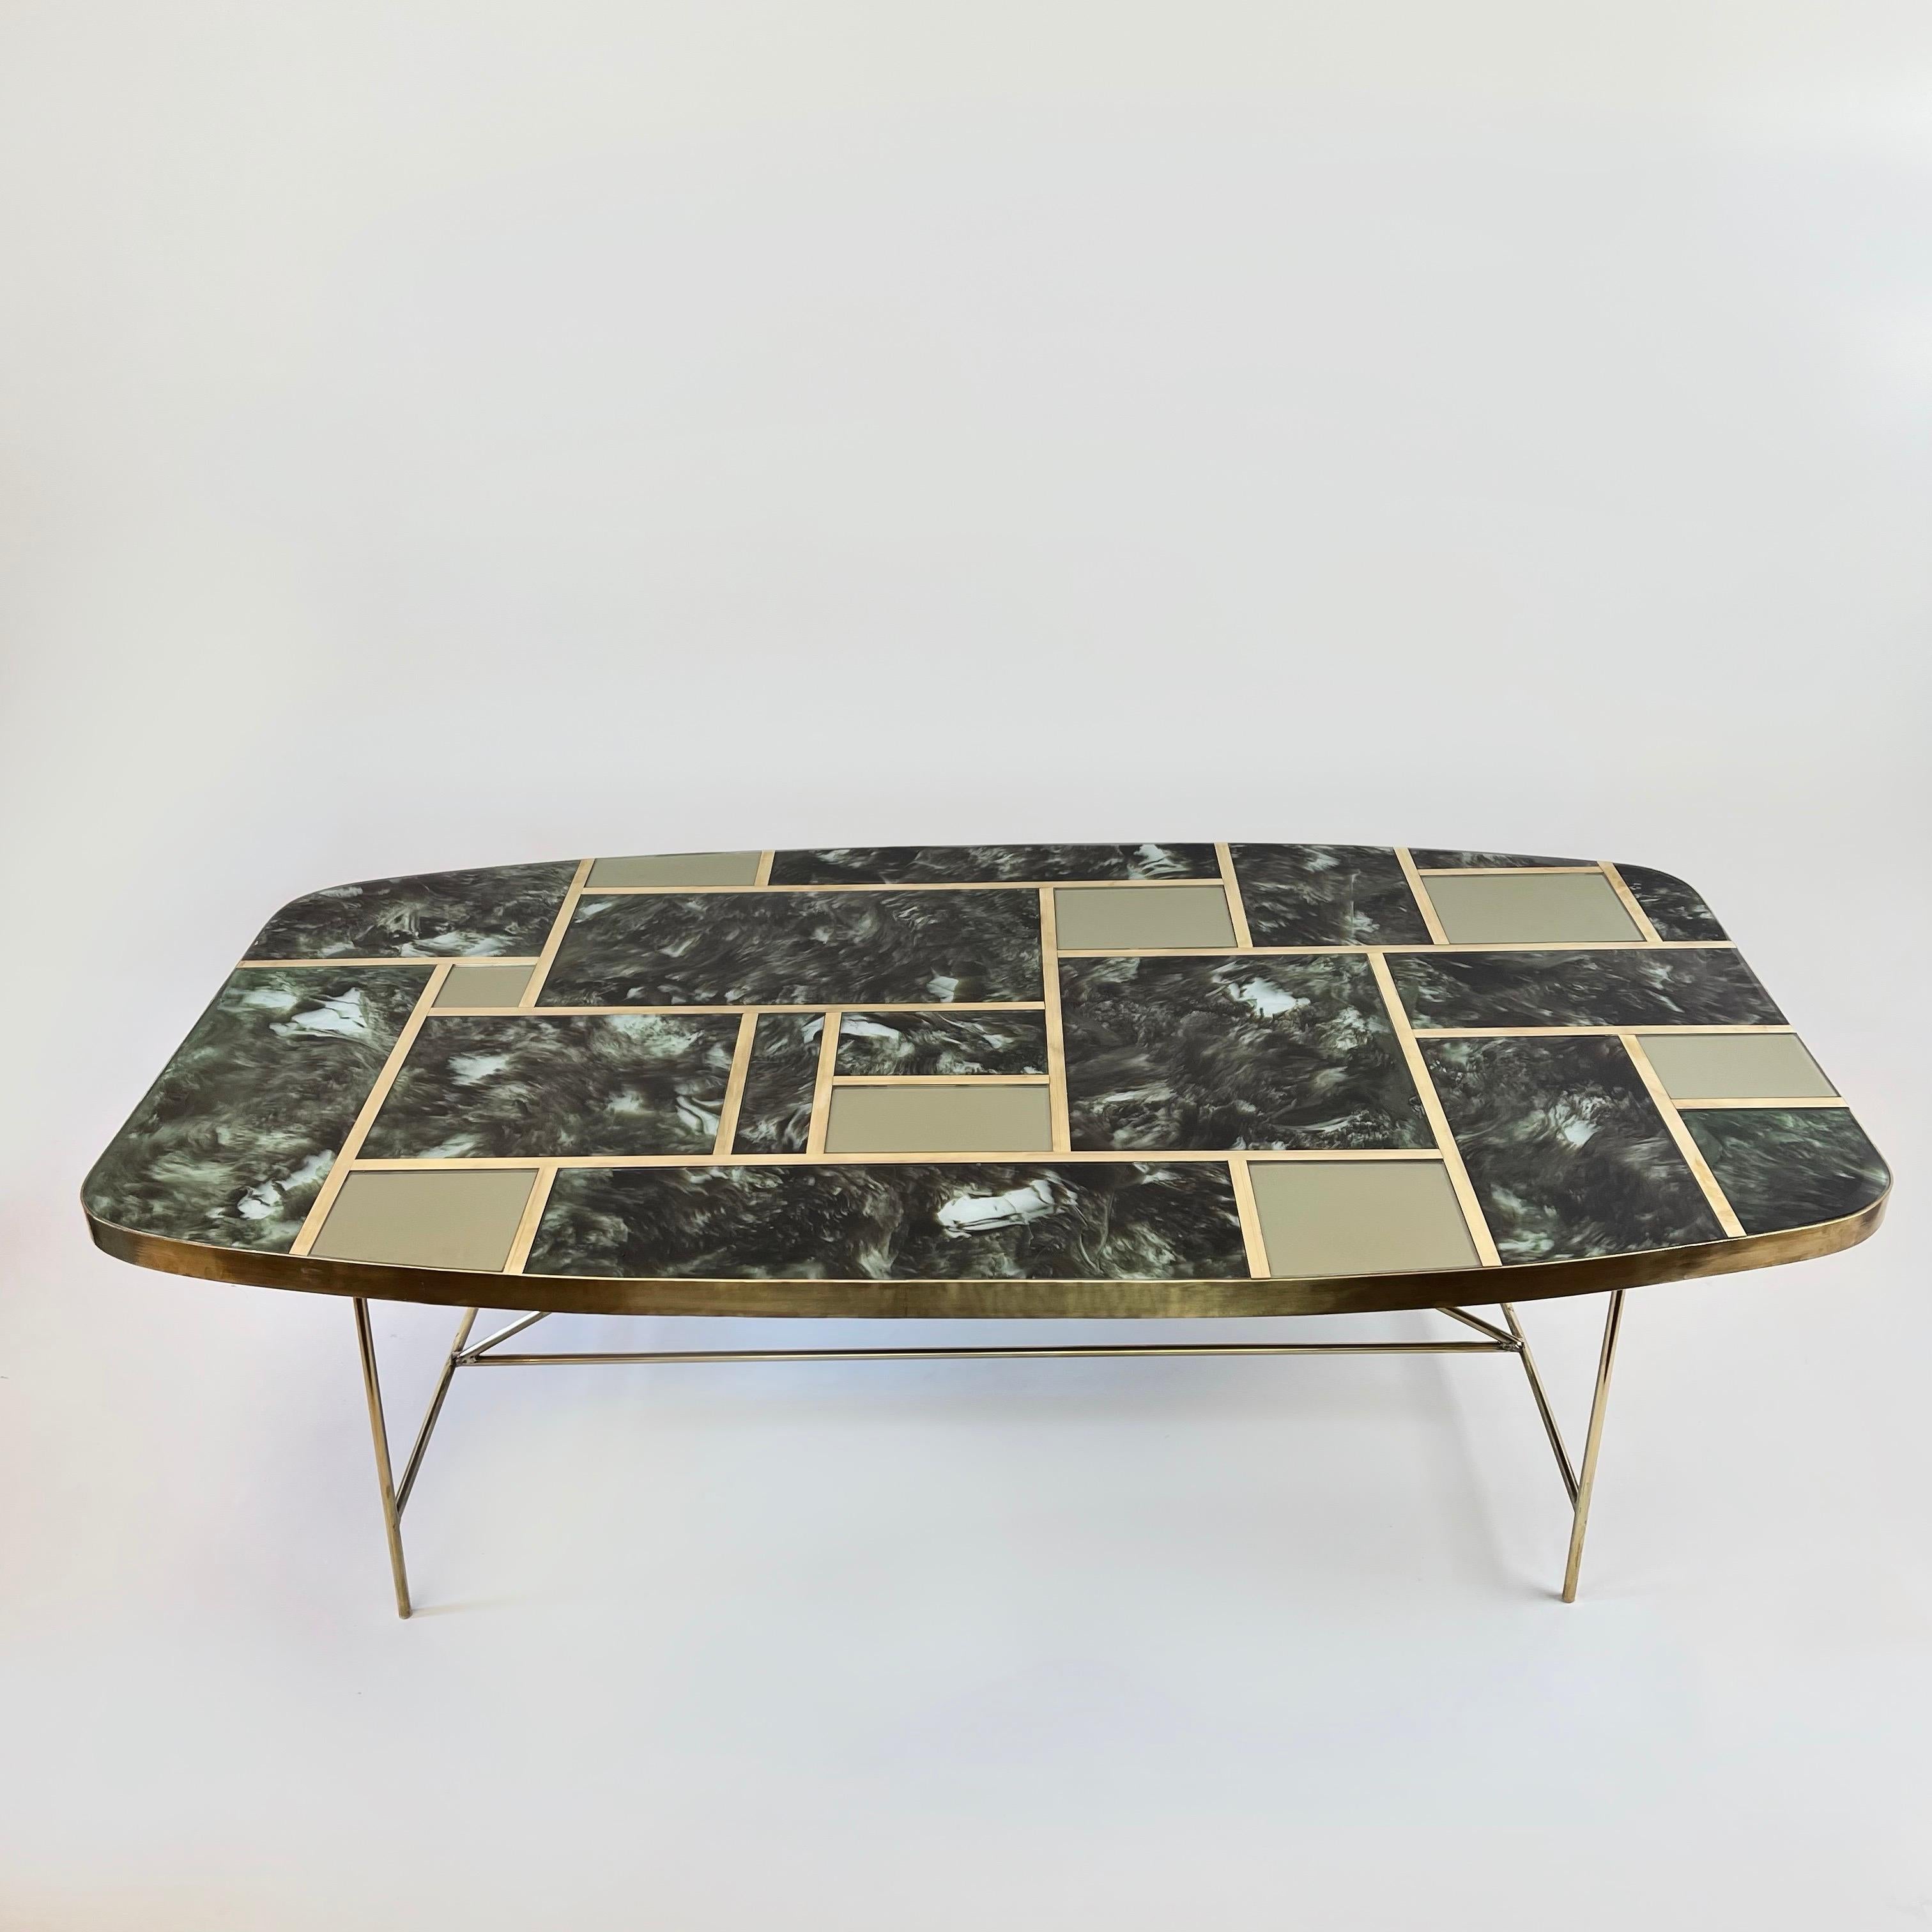 The coffee table marquetry top has two different glass colors: Emerald & Light Green (plain) and solid brass legs.
 